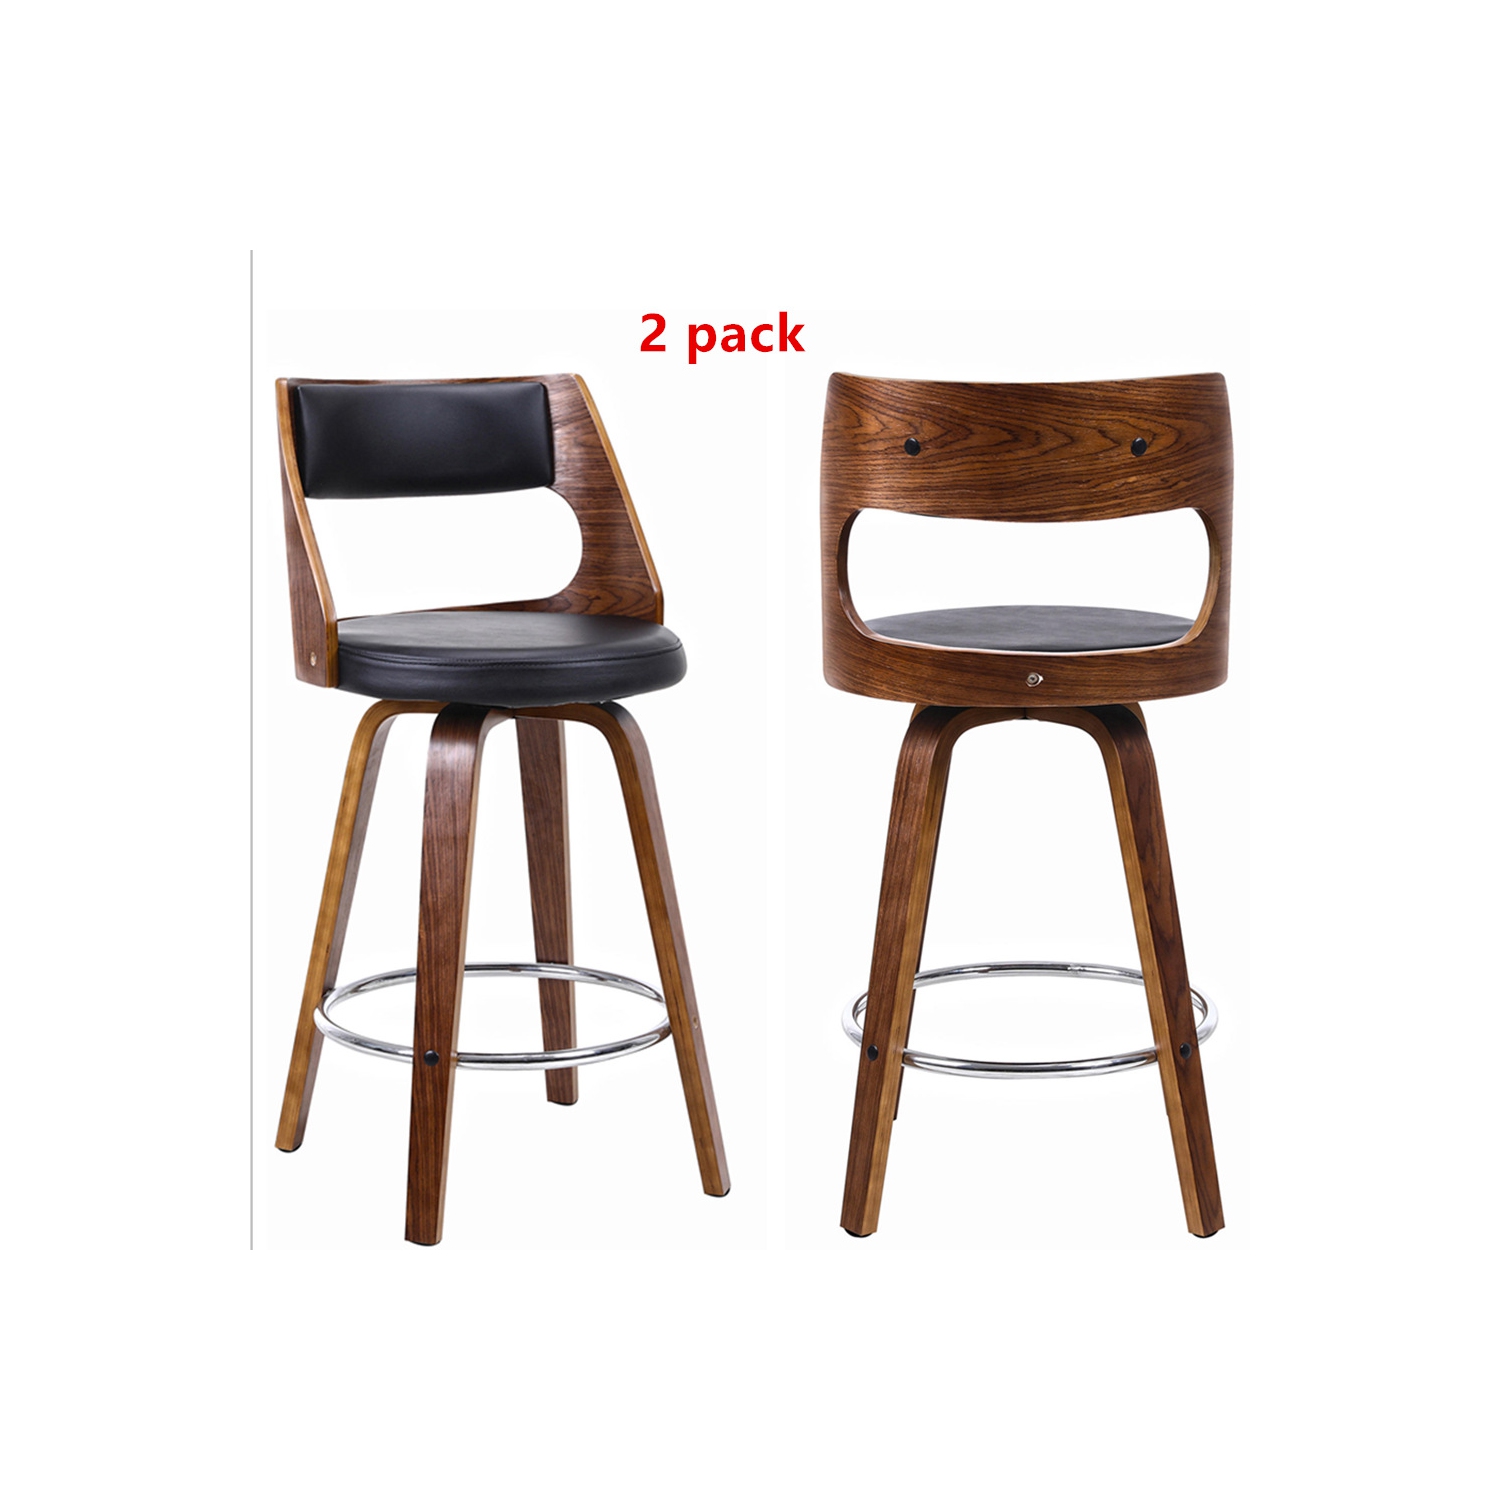 2 Pack Mid-Century 26 Inch Counter Stools Barstool with Back & Foot Ring , Wood Swivel Bar Stools（18.1"L x 19.1"D x 36.2" H）